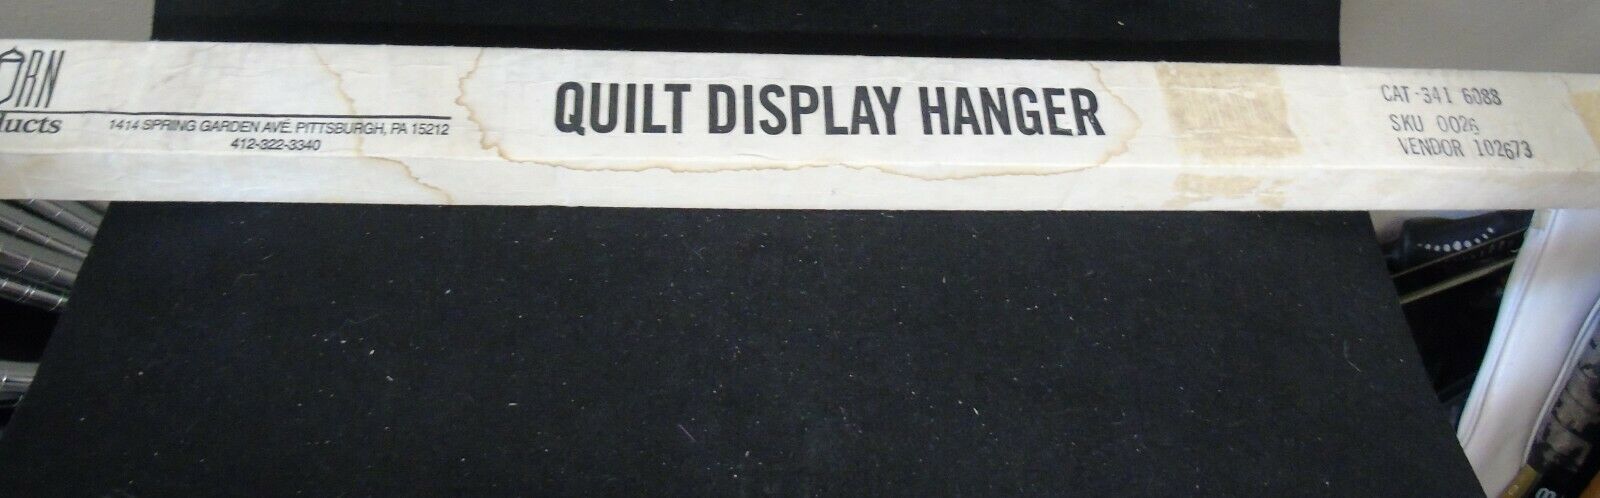 Quilt Display Hanger Acorn Products 36 Inch Boards